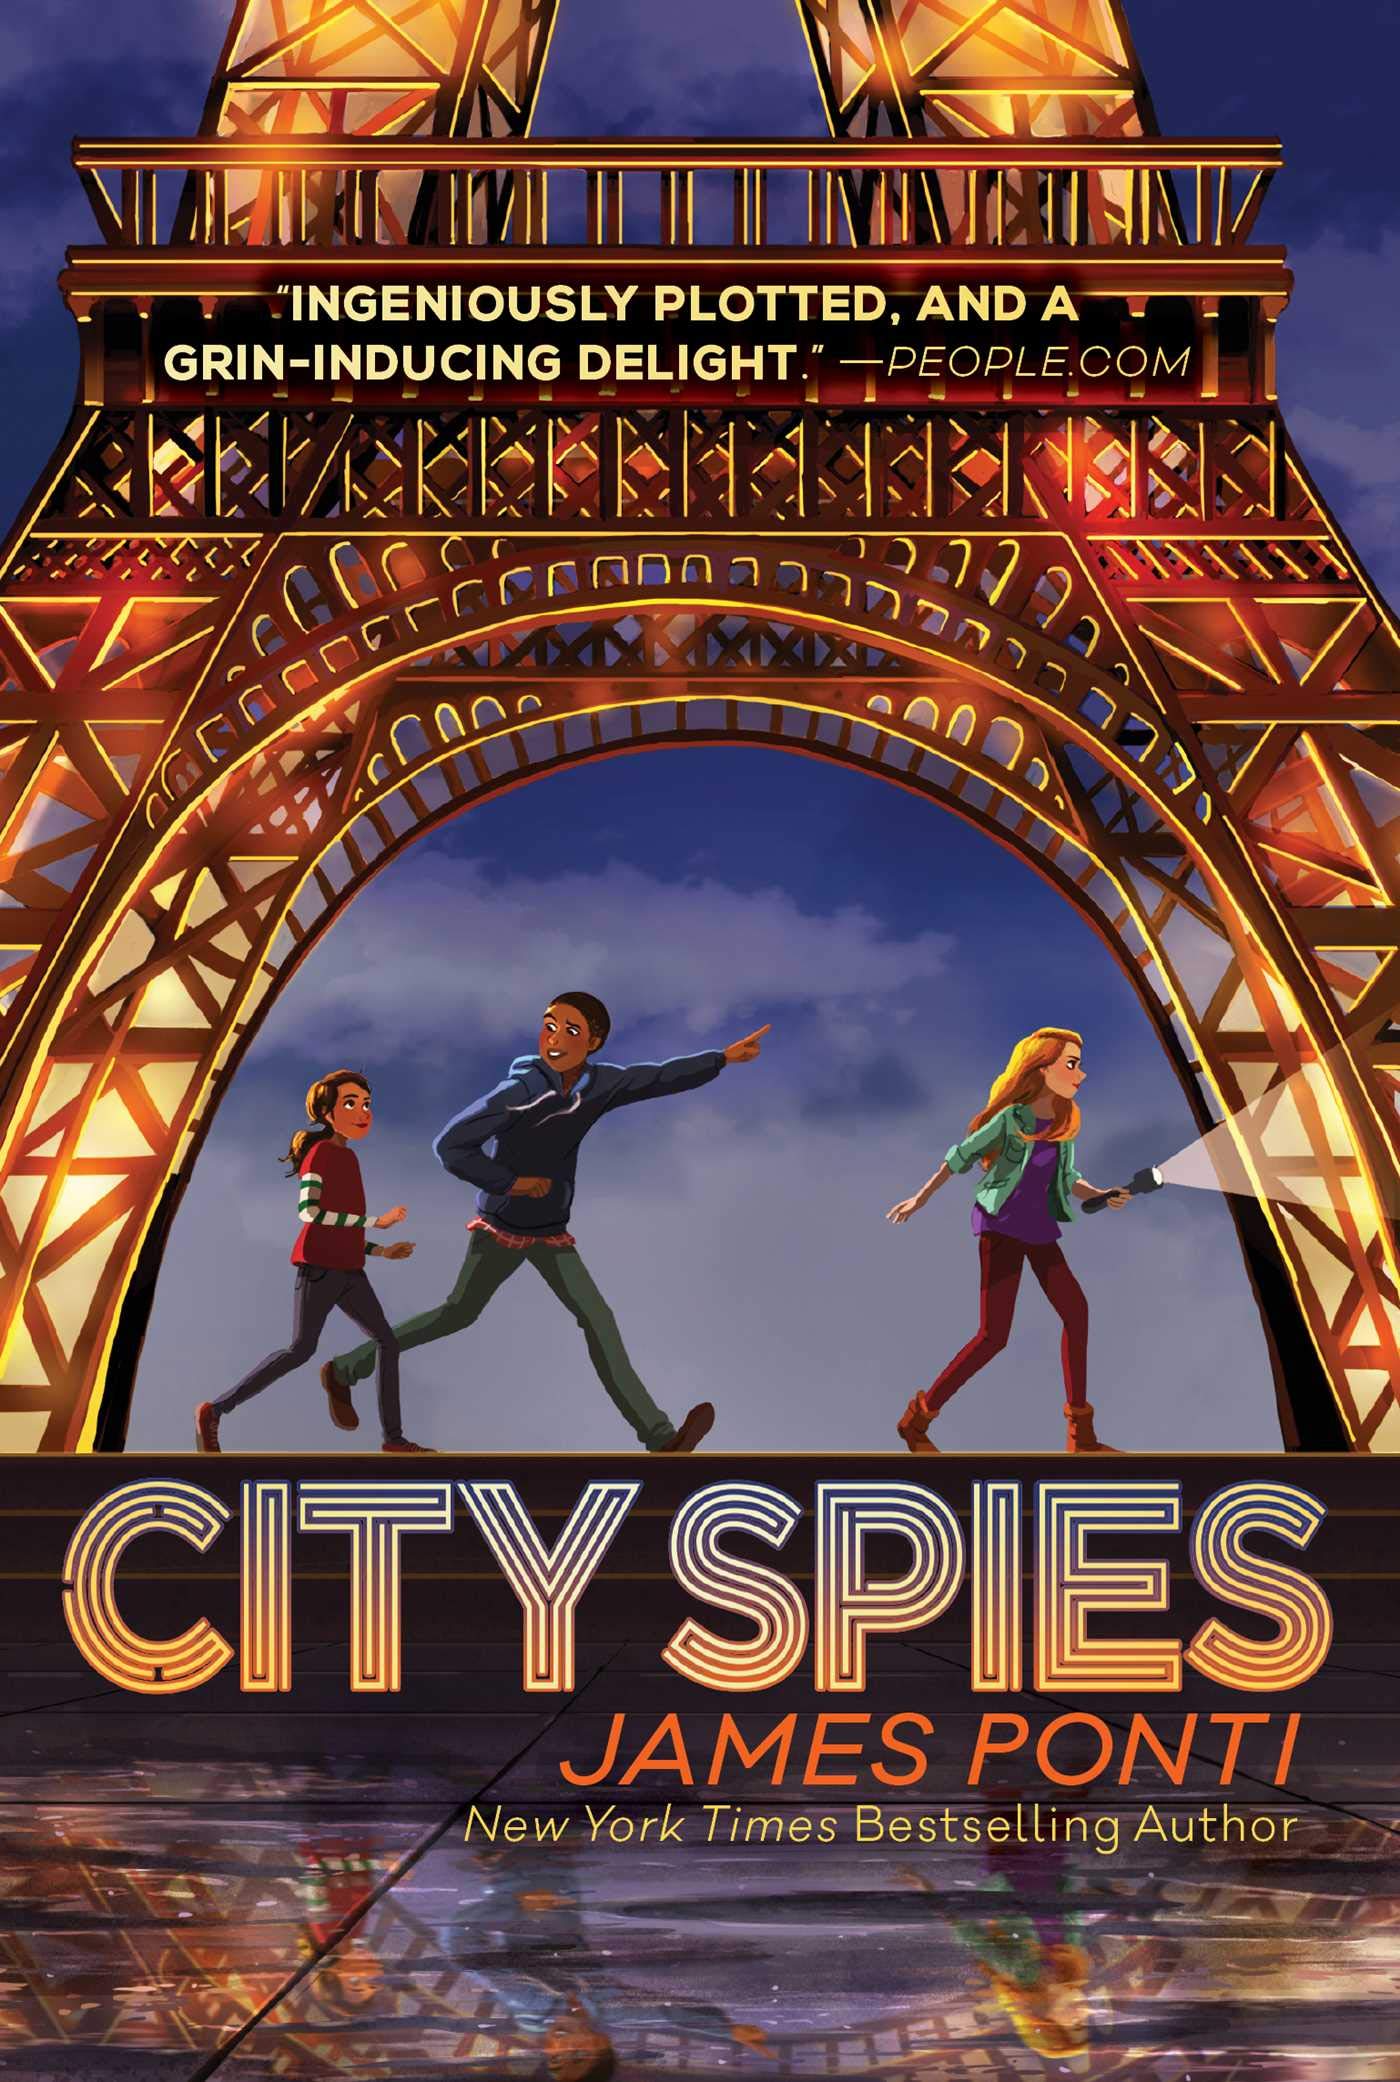 Image for "City Spies"